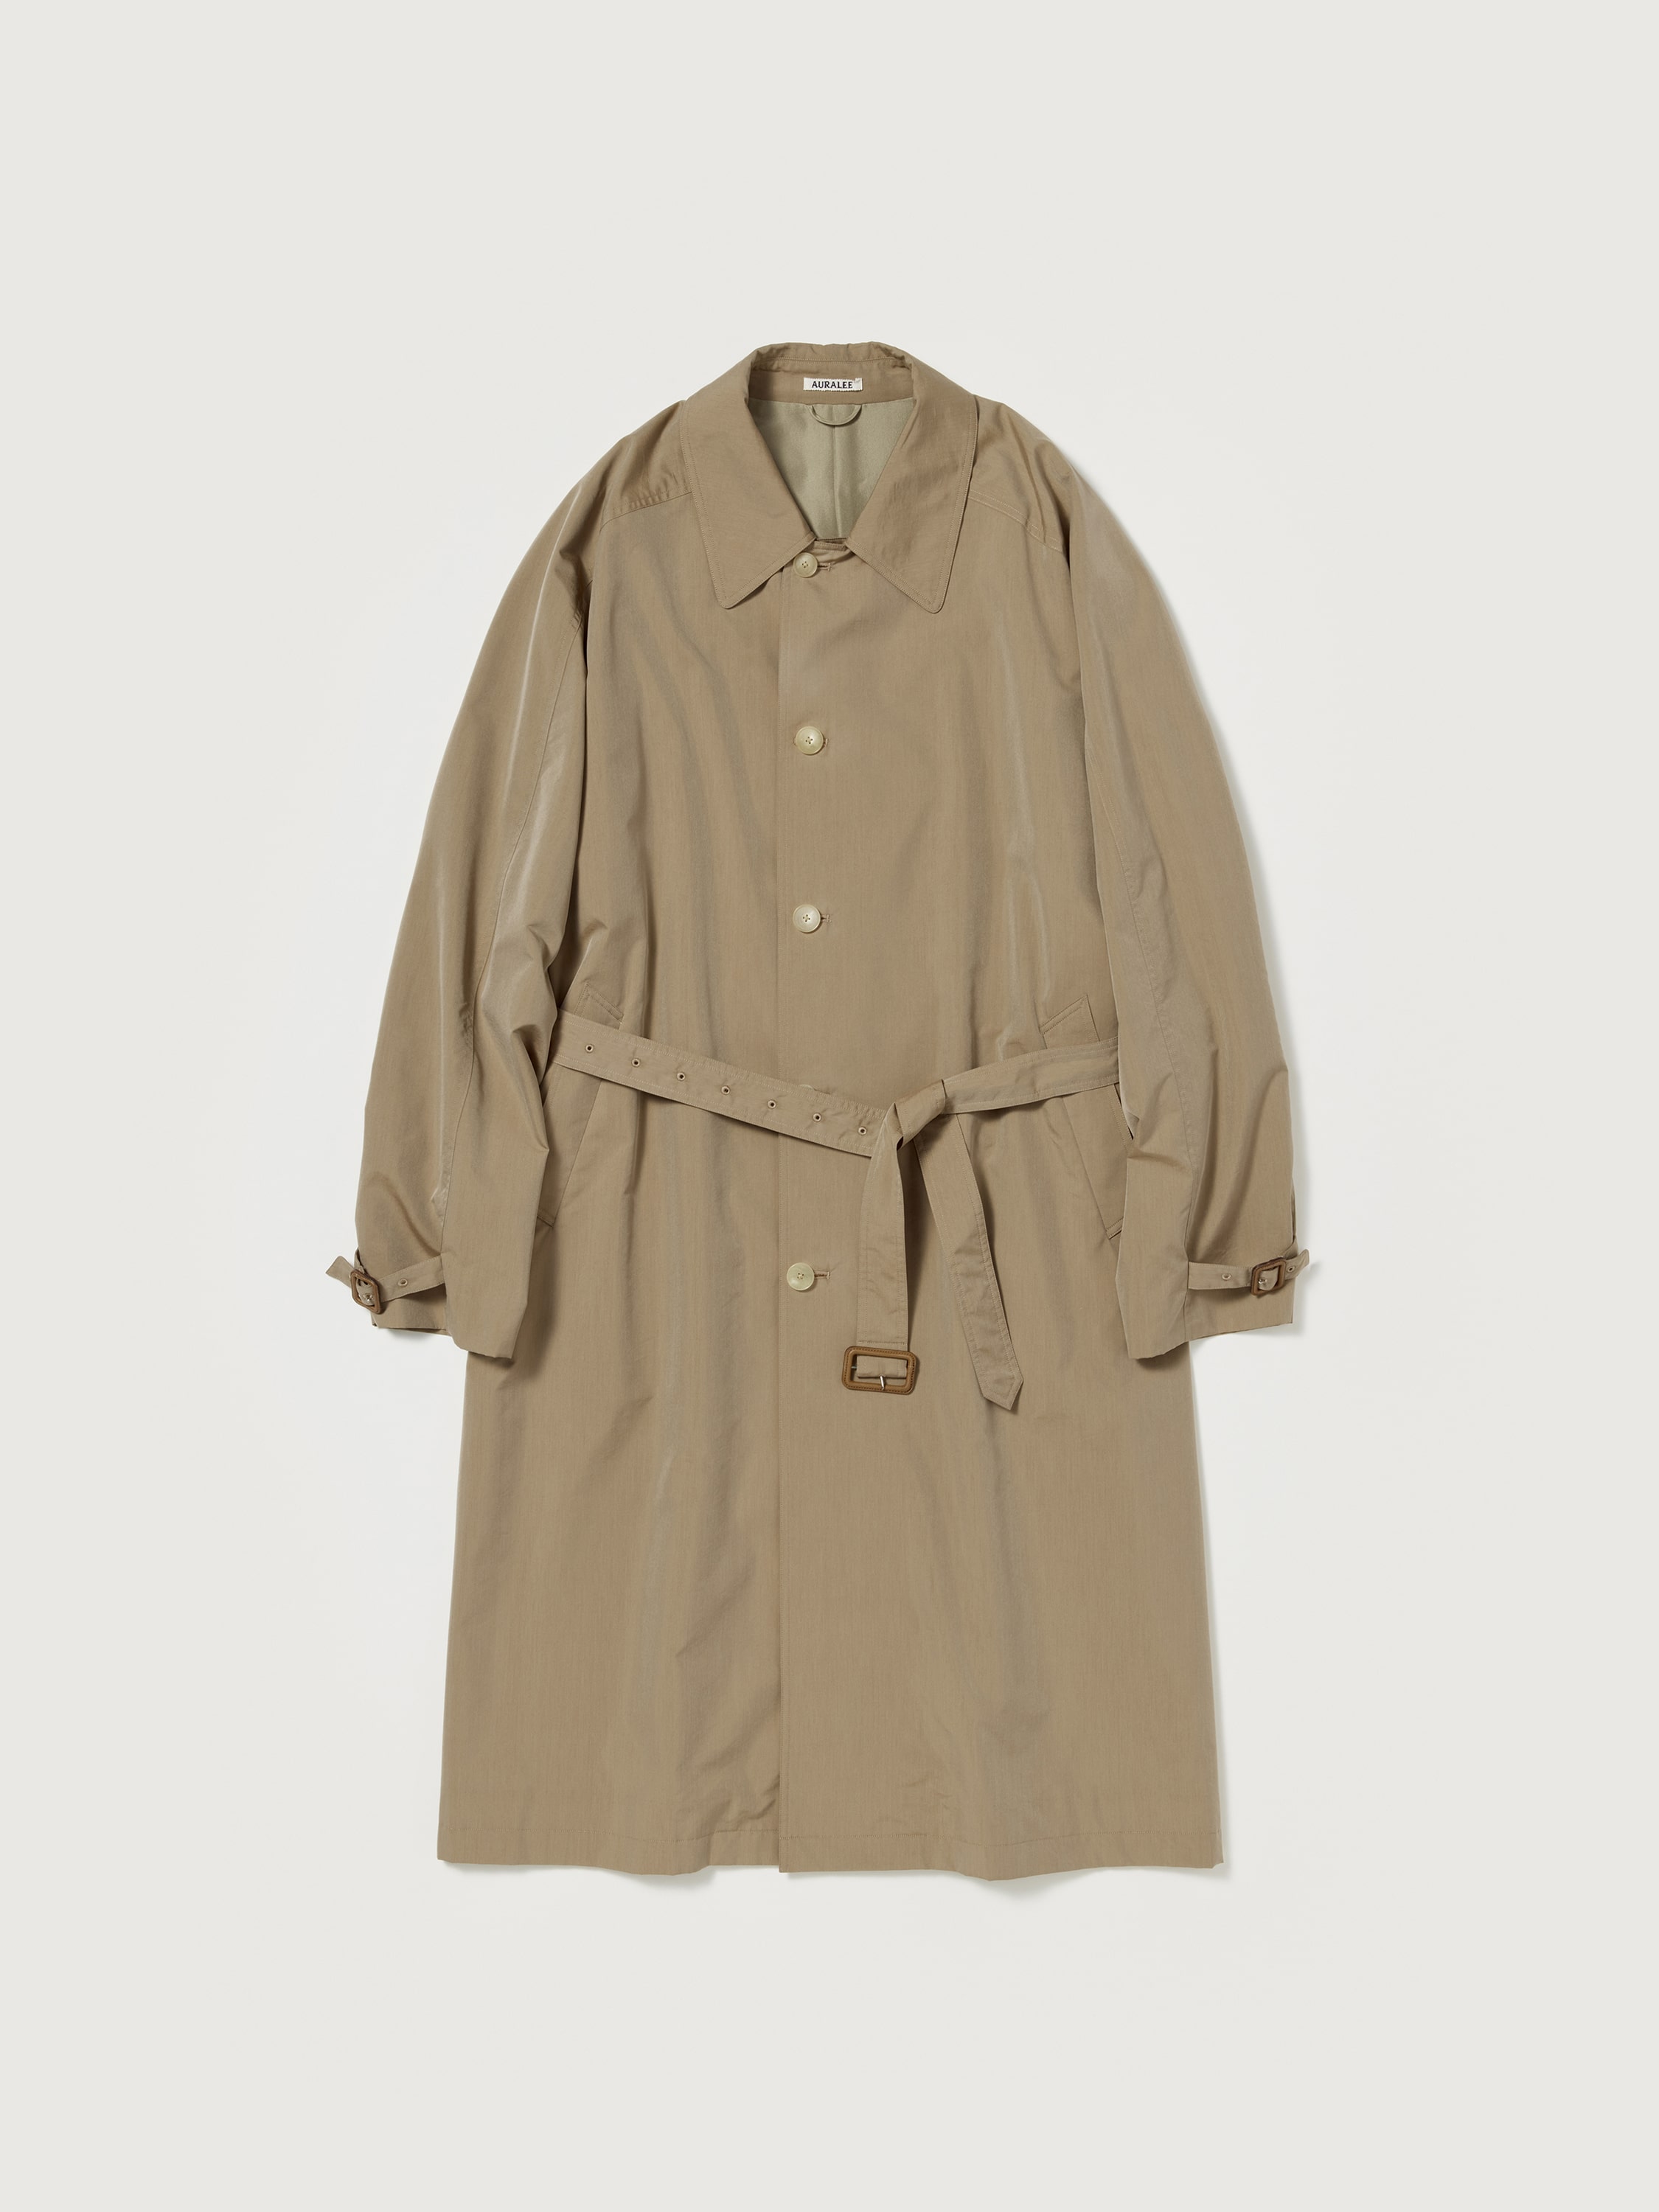 FINX POLYESTER WEATHER CHAMBRAY SOUTIEN COLLOAR COAT 詳細画像 BROWN CHAMBRAY 8